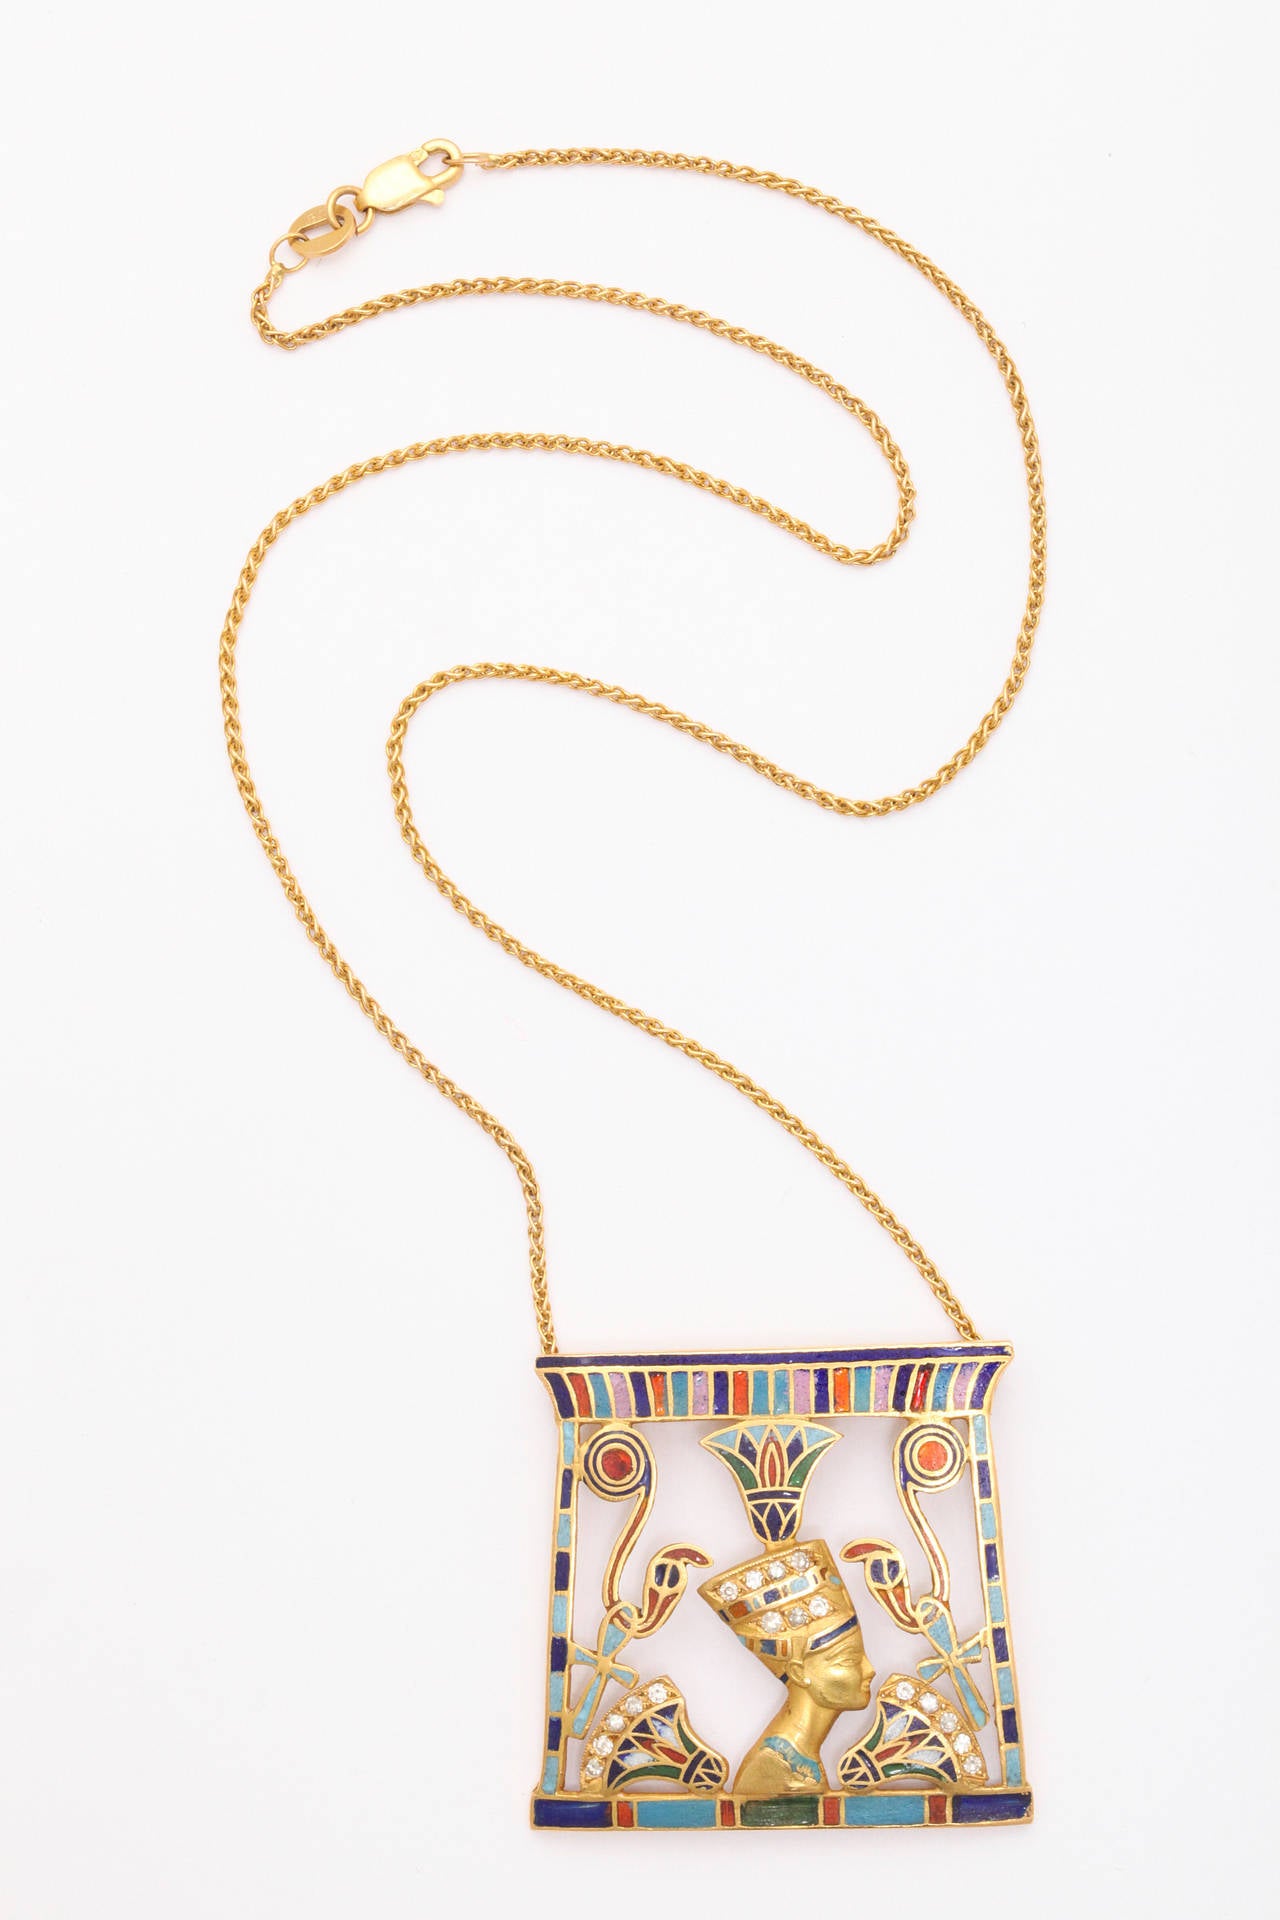 A striking pendant of Egyptian themes in18K yellow gold, featuring Queen Nefertiti, surrounded by cobra, lotus flower and Ankh (eternal life) symbols, set with diamonds and highlighted with multi color enamels. Unknown maker marks.  1 1/4 inches x 1